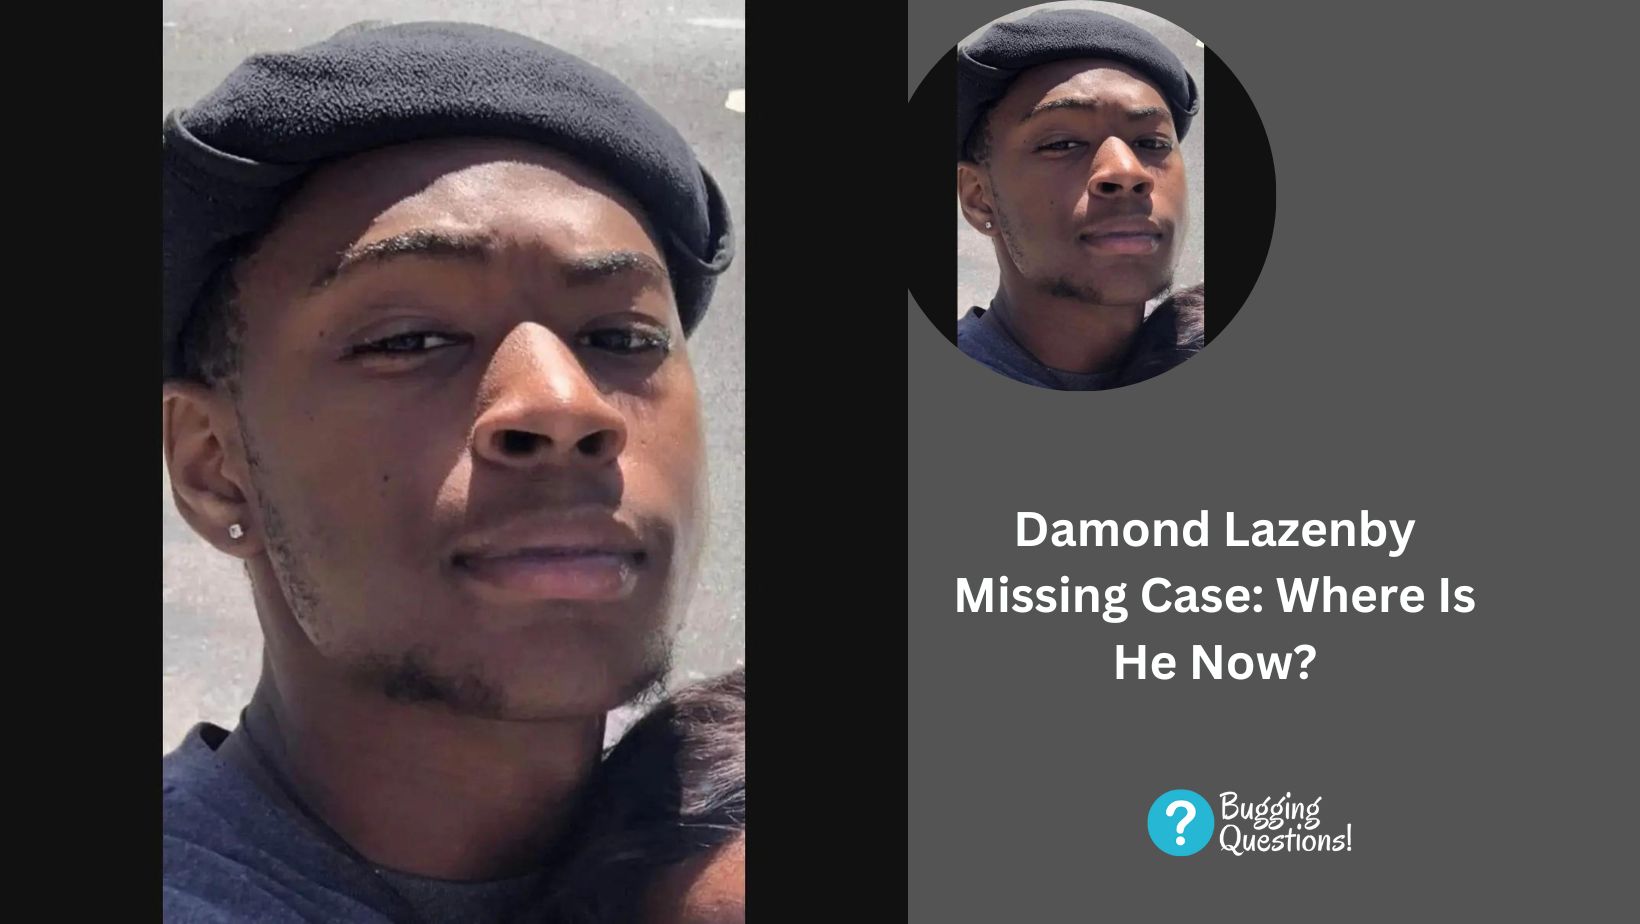 Damond Lazenby Missing Case: Where Is He Now?